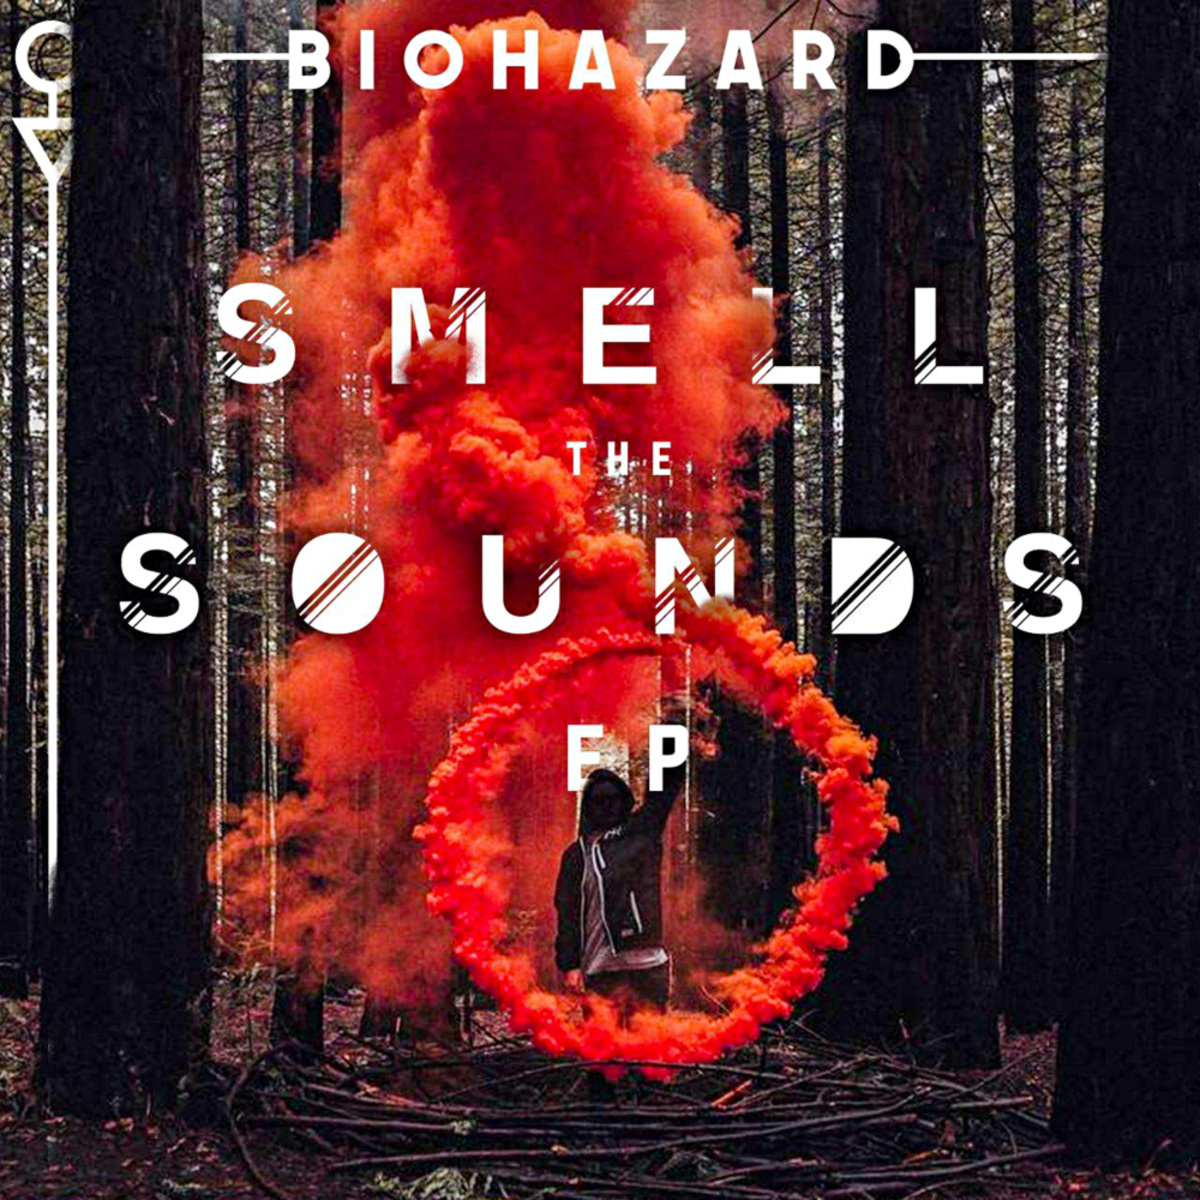 BioHazard People - Smell The Sounds EP / OneBigFamily Records